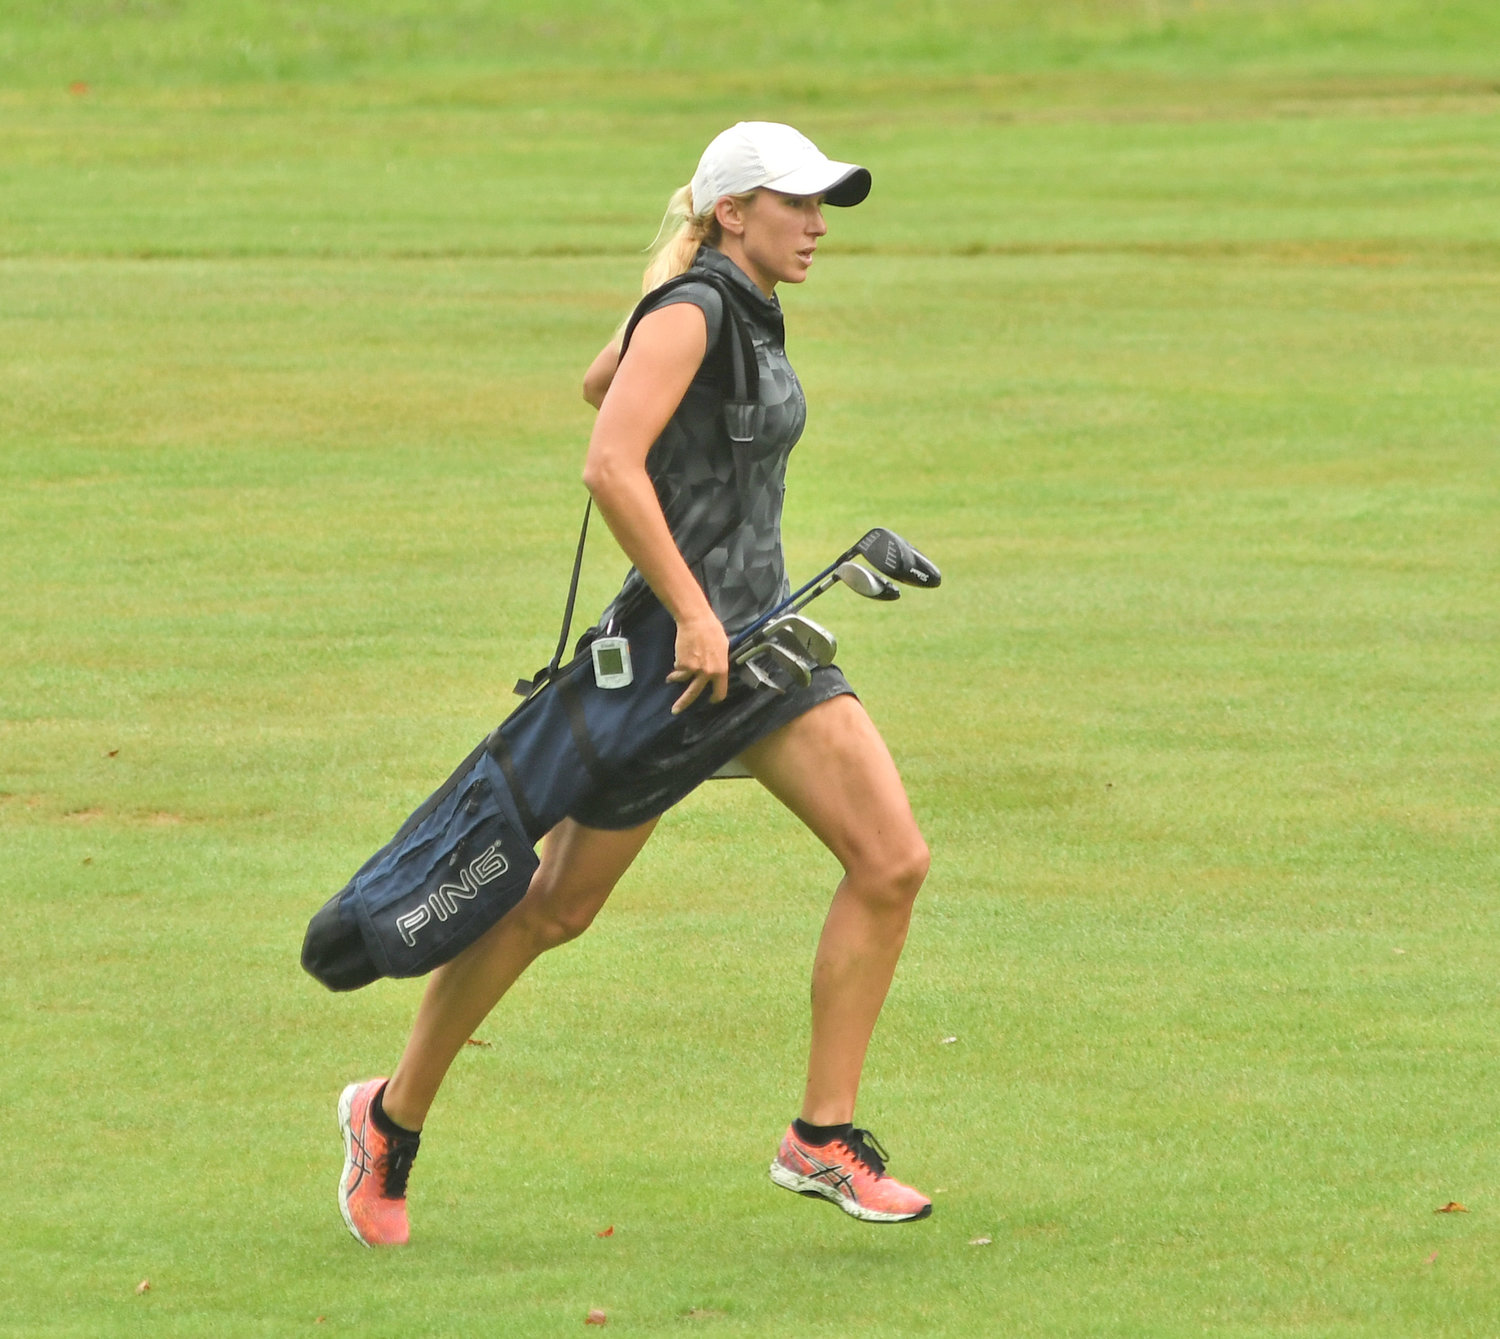 RUNNING TO HER BALL — Rome's Lauren Cupp runs up the 18th fairway after her second shot during the second round of the Thirsty Owl New York Speedgolf Open on Monday morning at Rome Country Club.